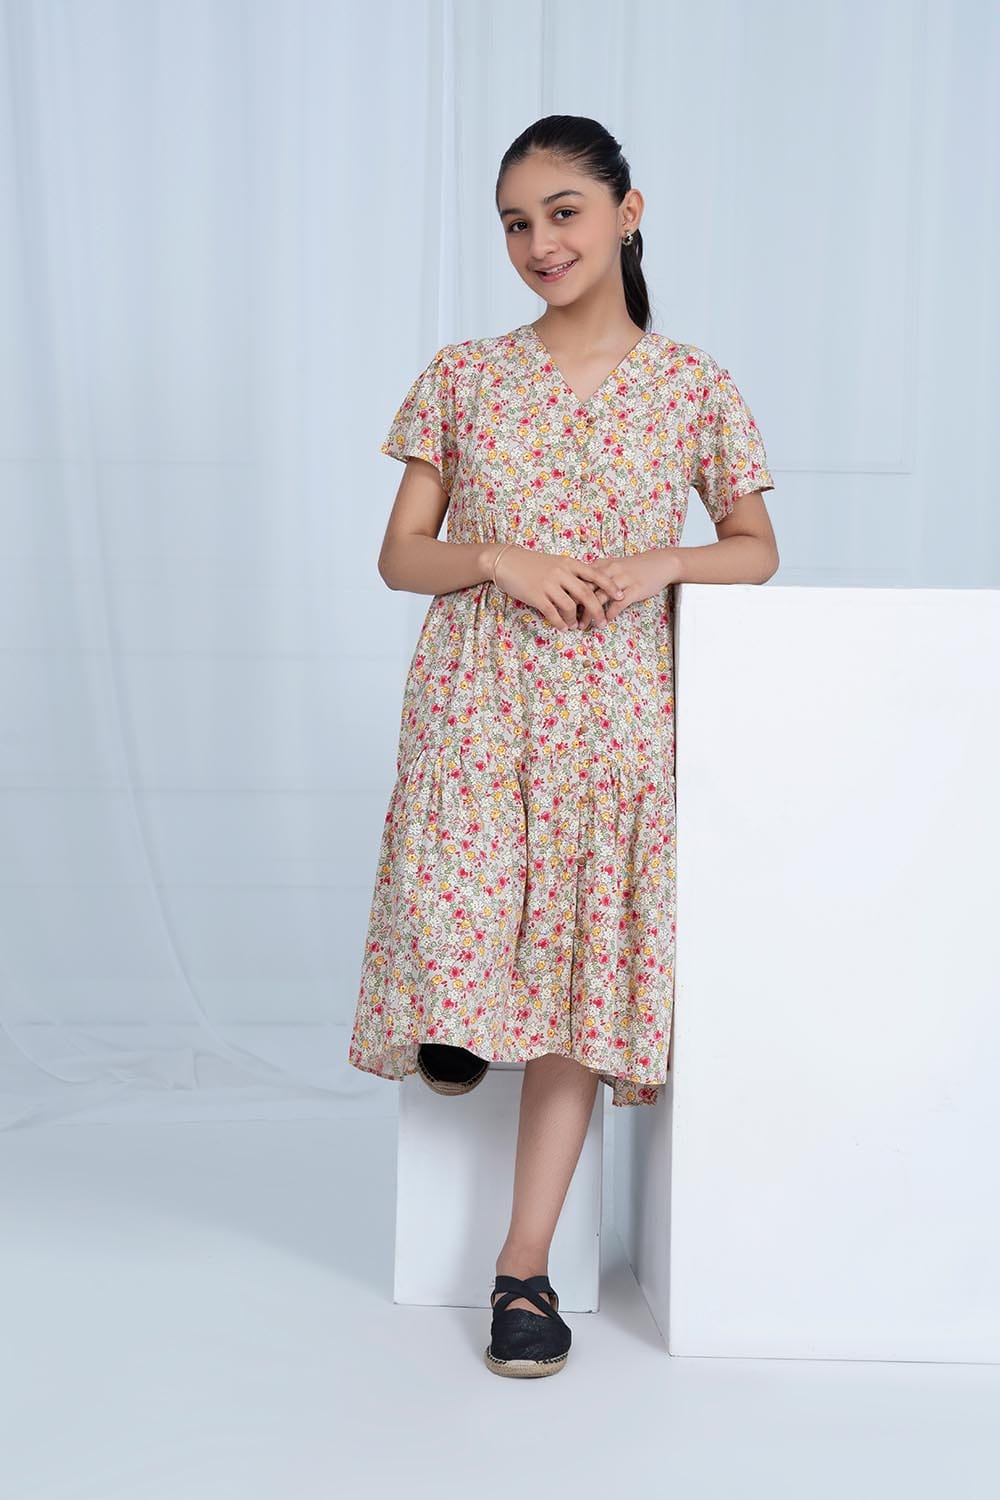 Hope Not Out by Shahid Afridi Eastern Women Shirts Girls Flora Printed Dress